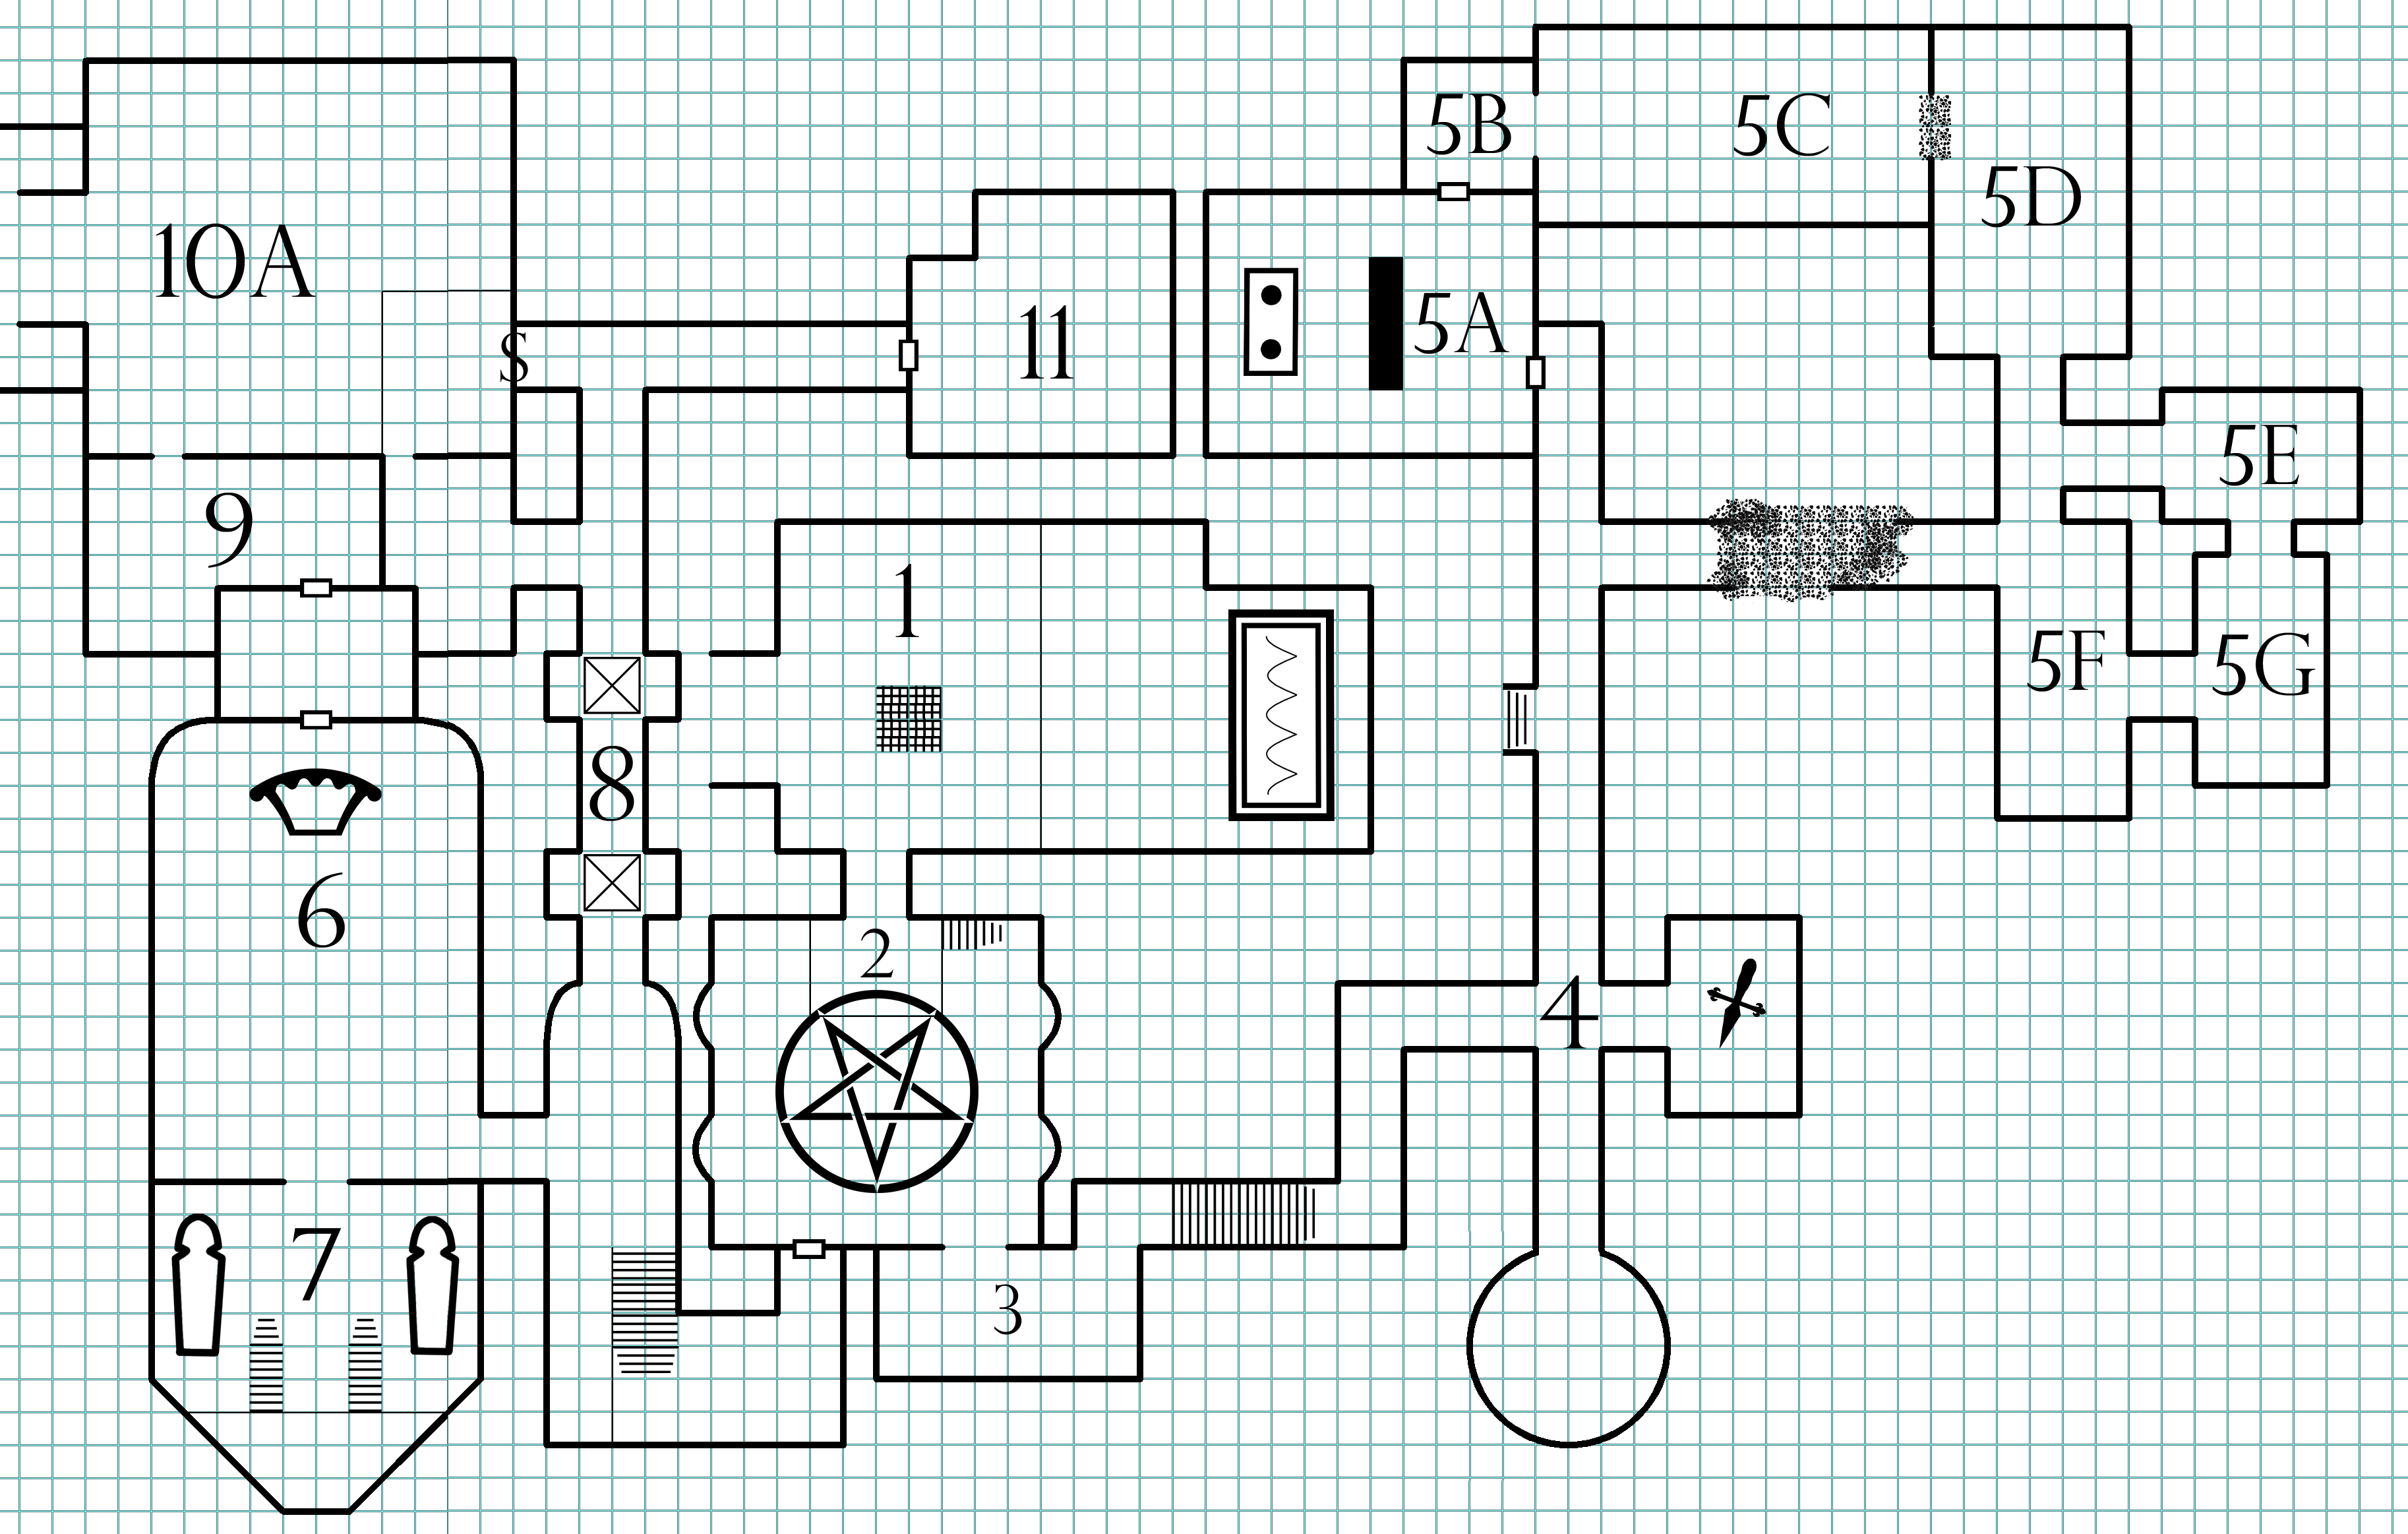 Sample Dungeon Map - The Alexandrian